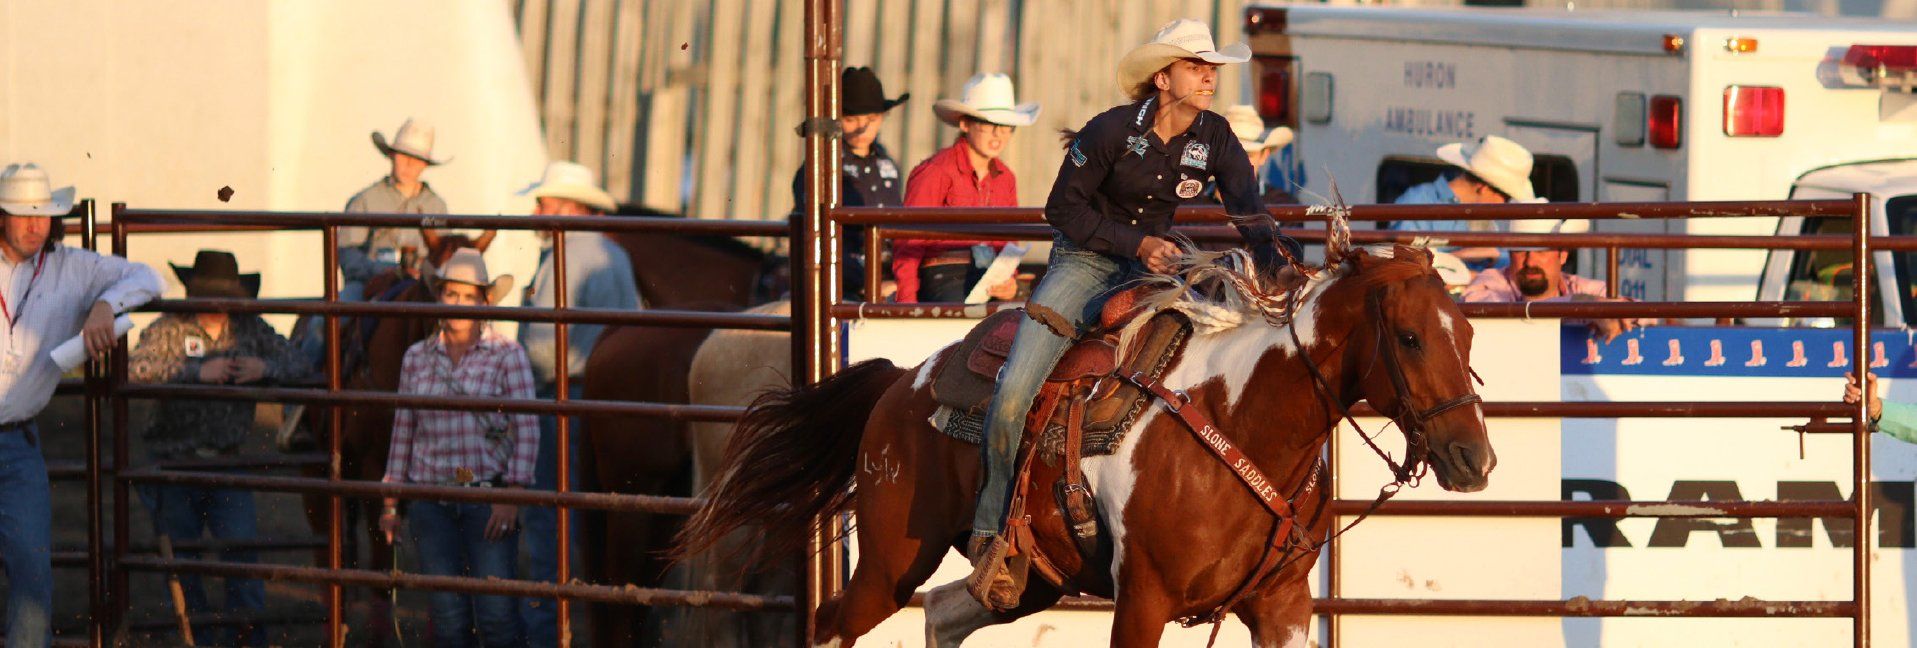 One Tough Sport, Rodeo rides on rural life’s fabric